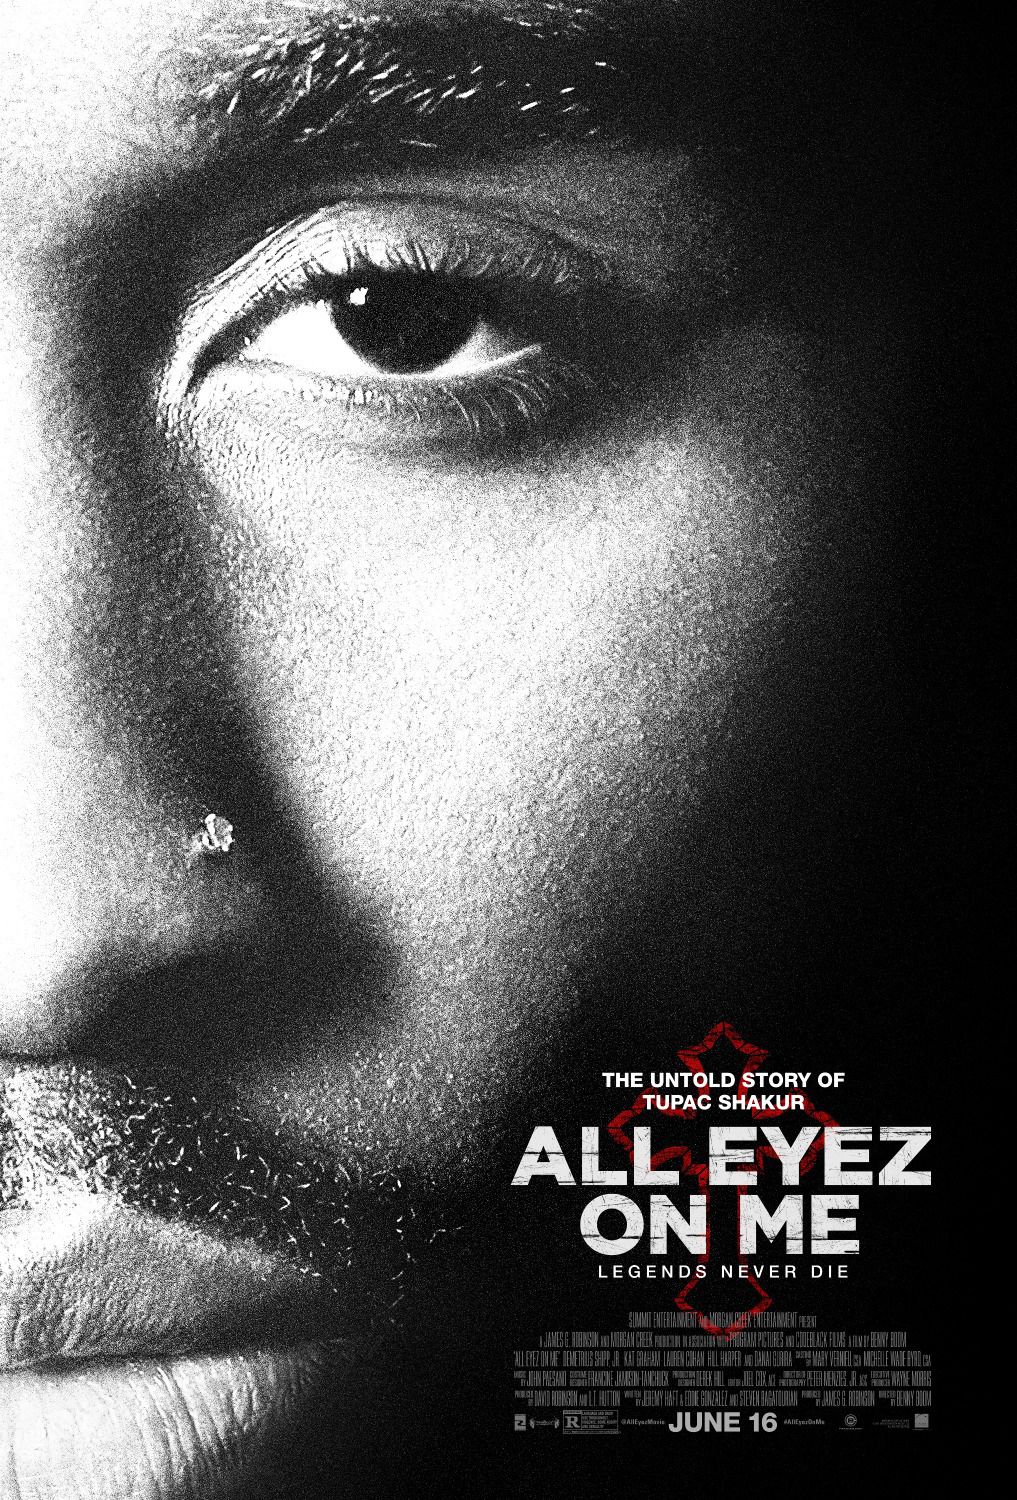 All Eyez On Me (2017) Posters (1 of 1)